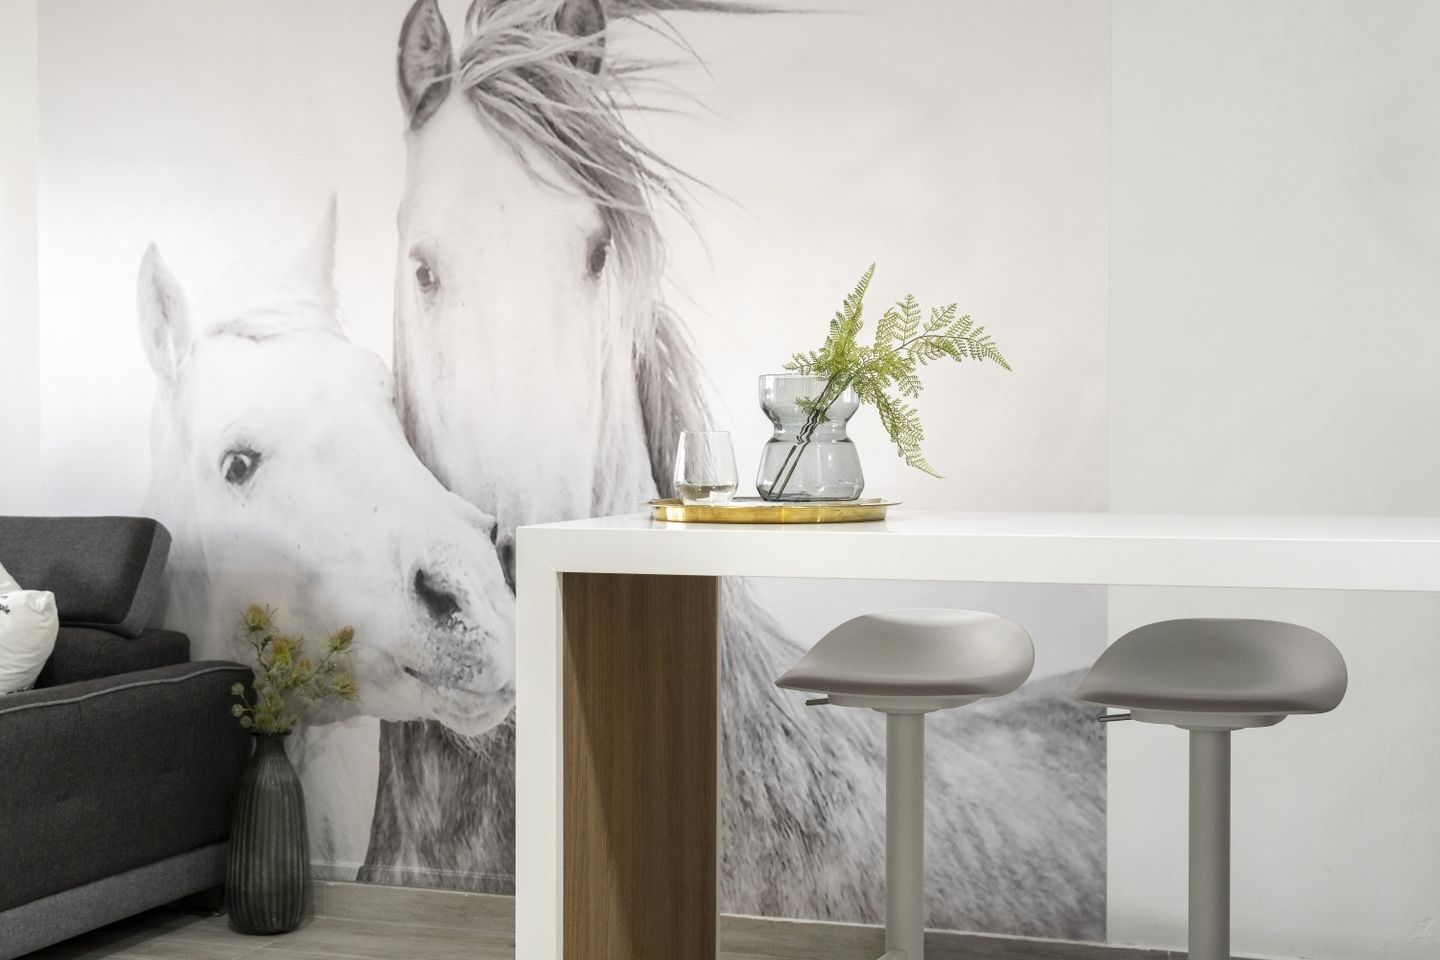 Wall Design With Black And White Horse-Printed Wallpaper - Livspace